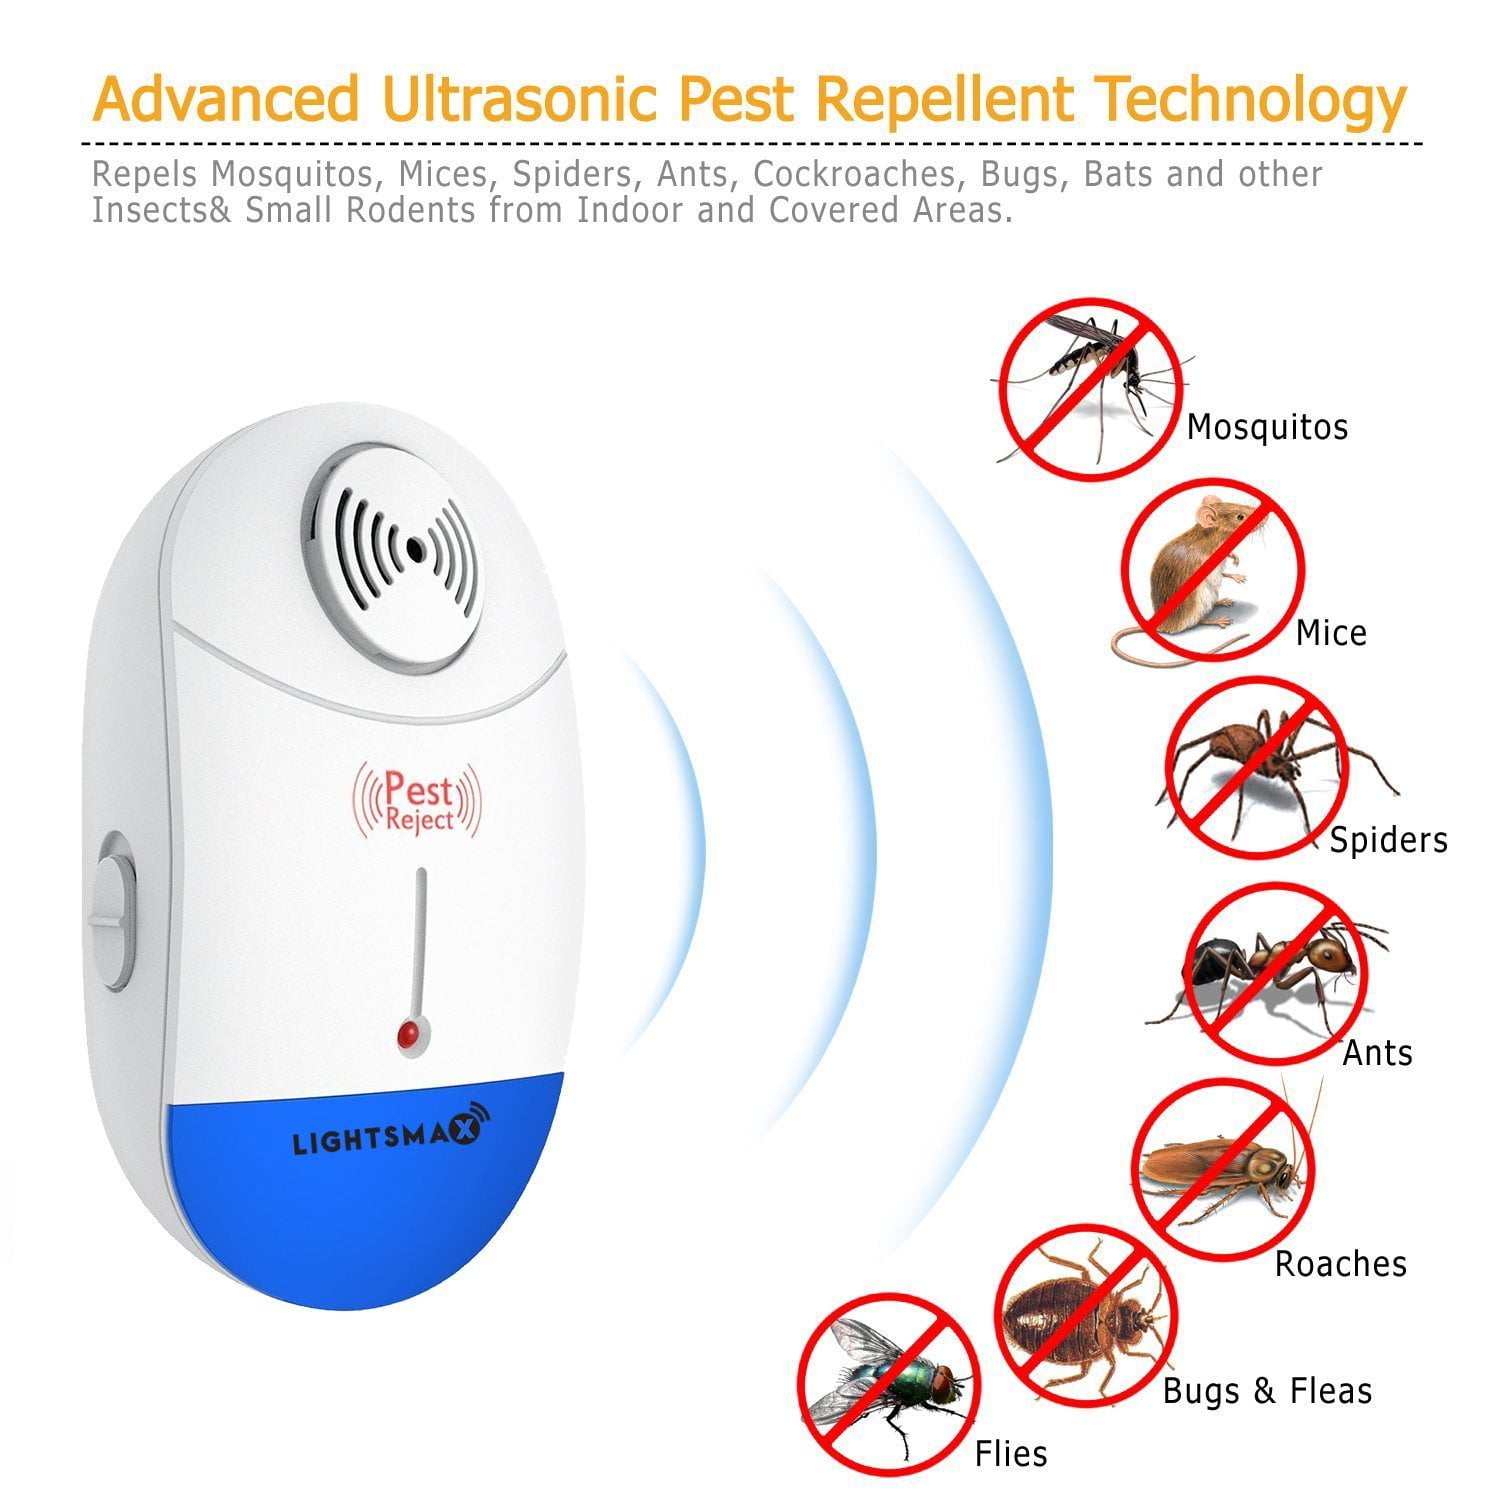 Rats Roaches 6 Packs Pest Repellent Plug in Indoor for Anti Mice Insects Spiders Ultrasonic Pest Repeller Upgraded Eco-Friendly Ultrasonic Pest Control Rodents Mosquitos Ants Bugs